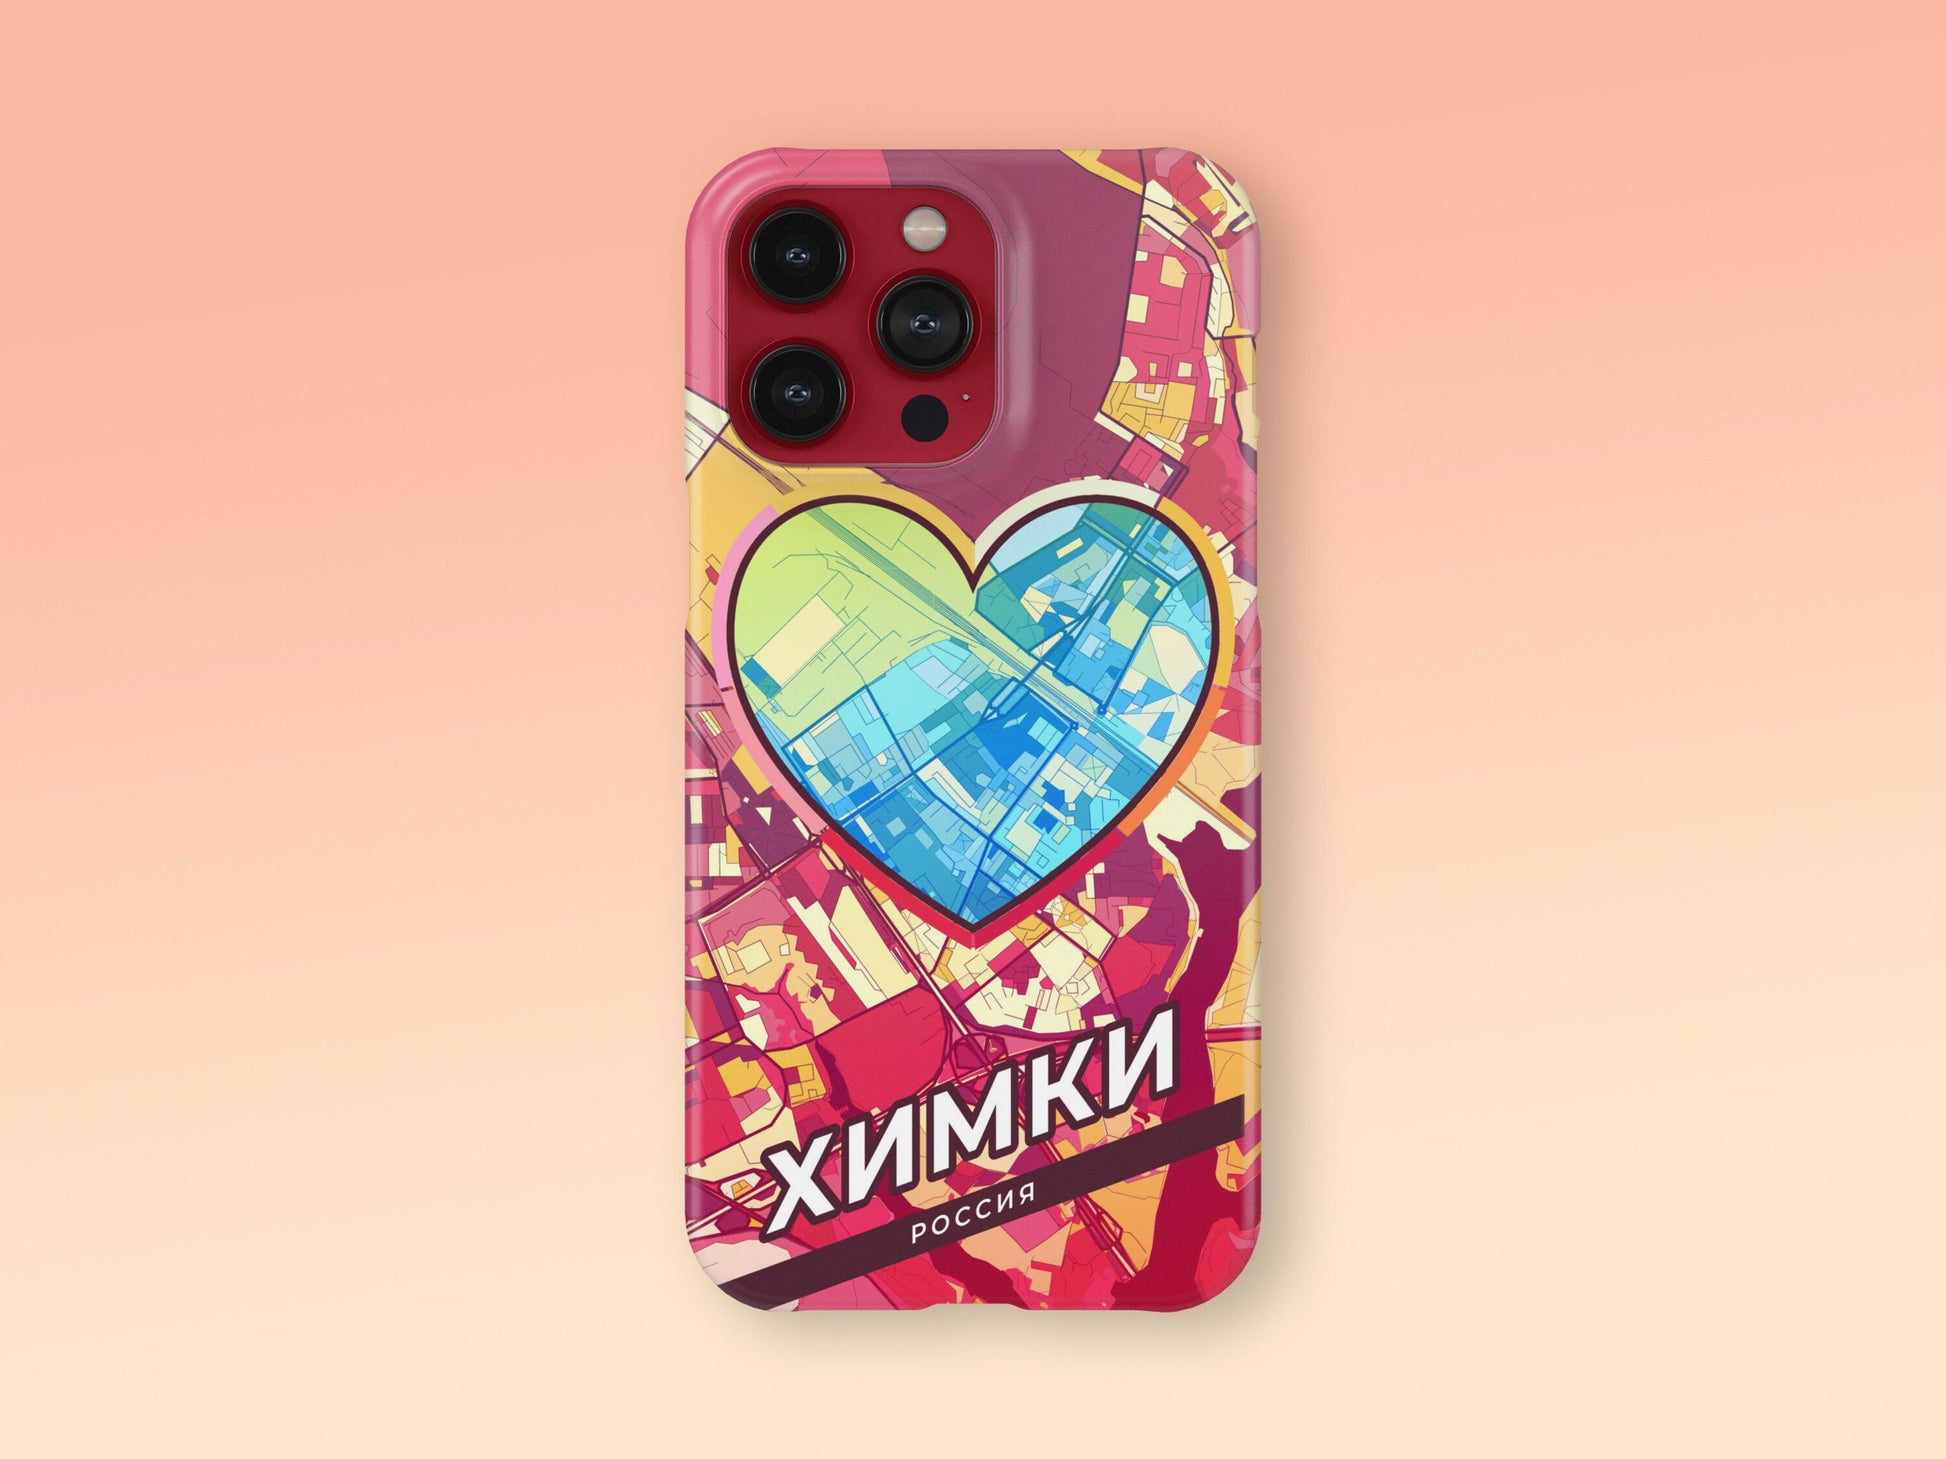 Khimki Russia slim phone case with colorful icon. Birthday, wedding or housewarming gift. Couple match cases. 2